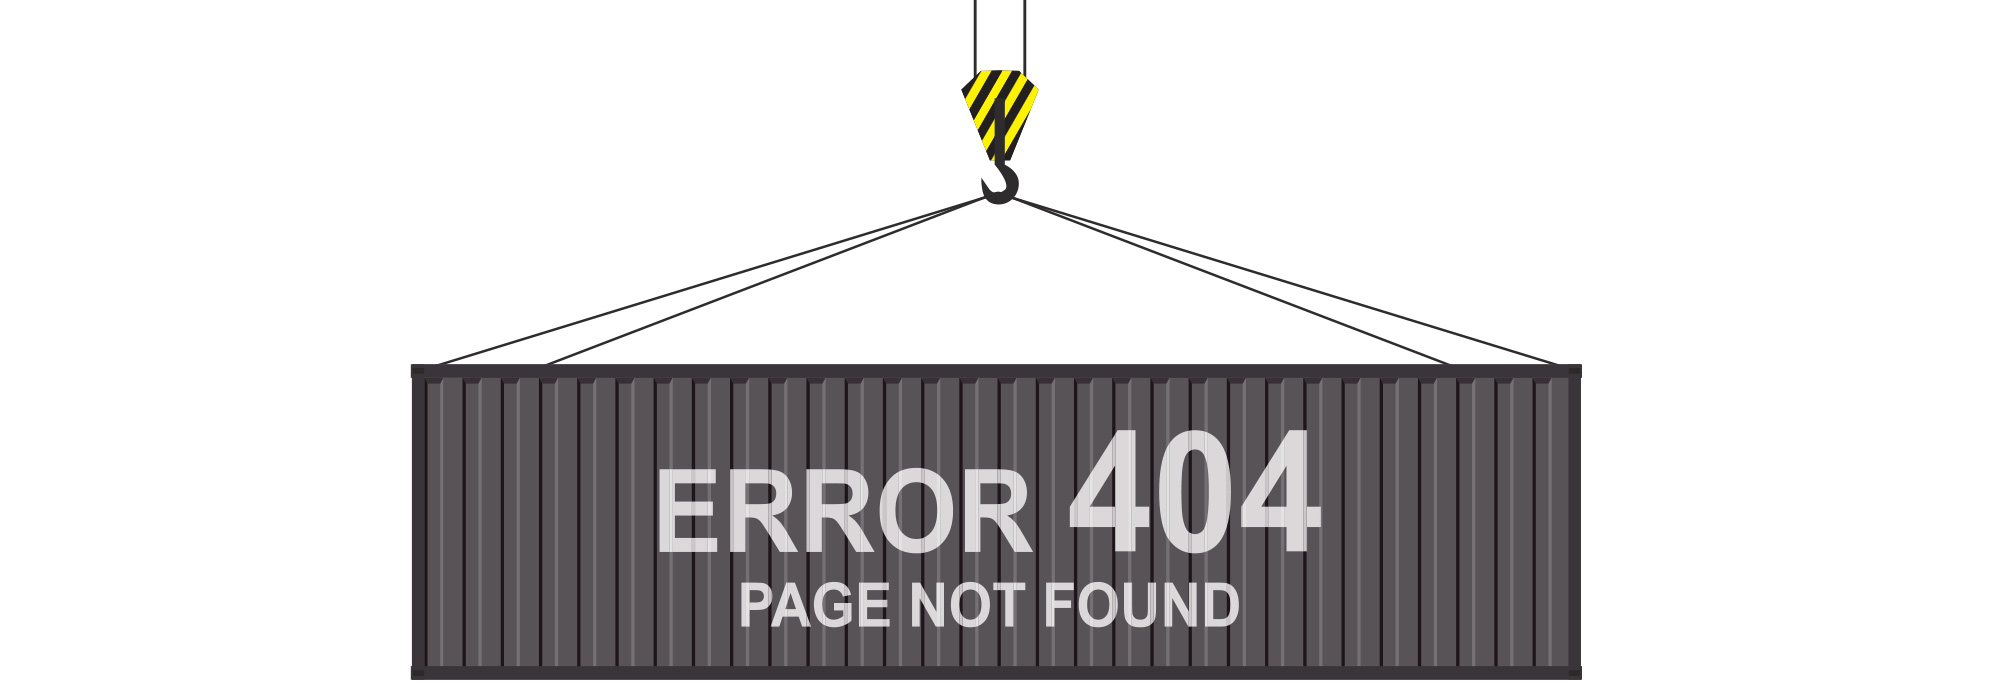 404 Error Shipping Container